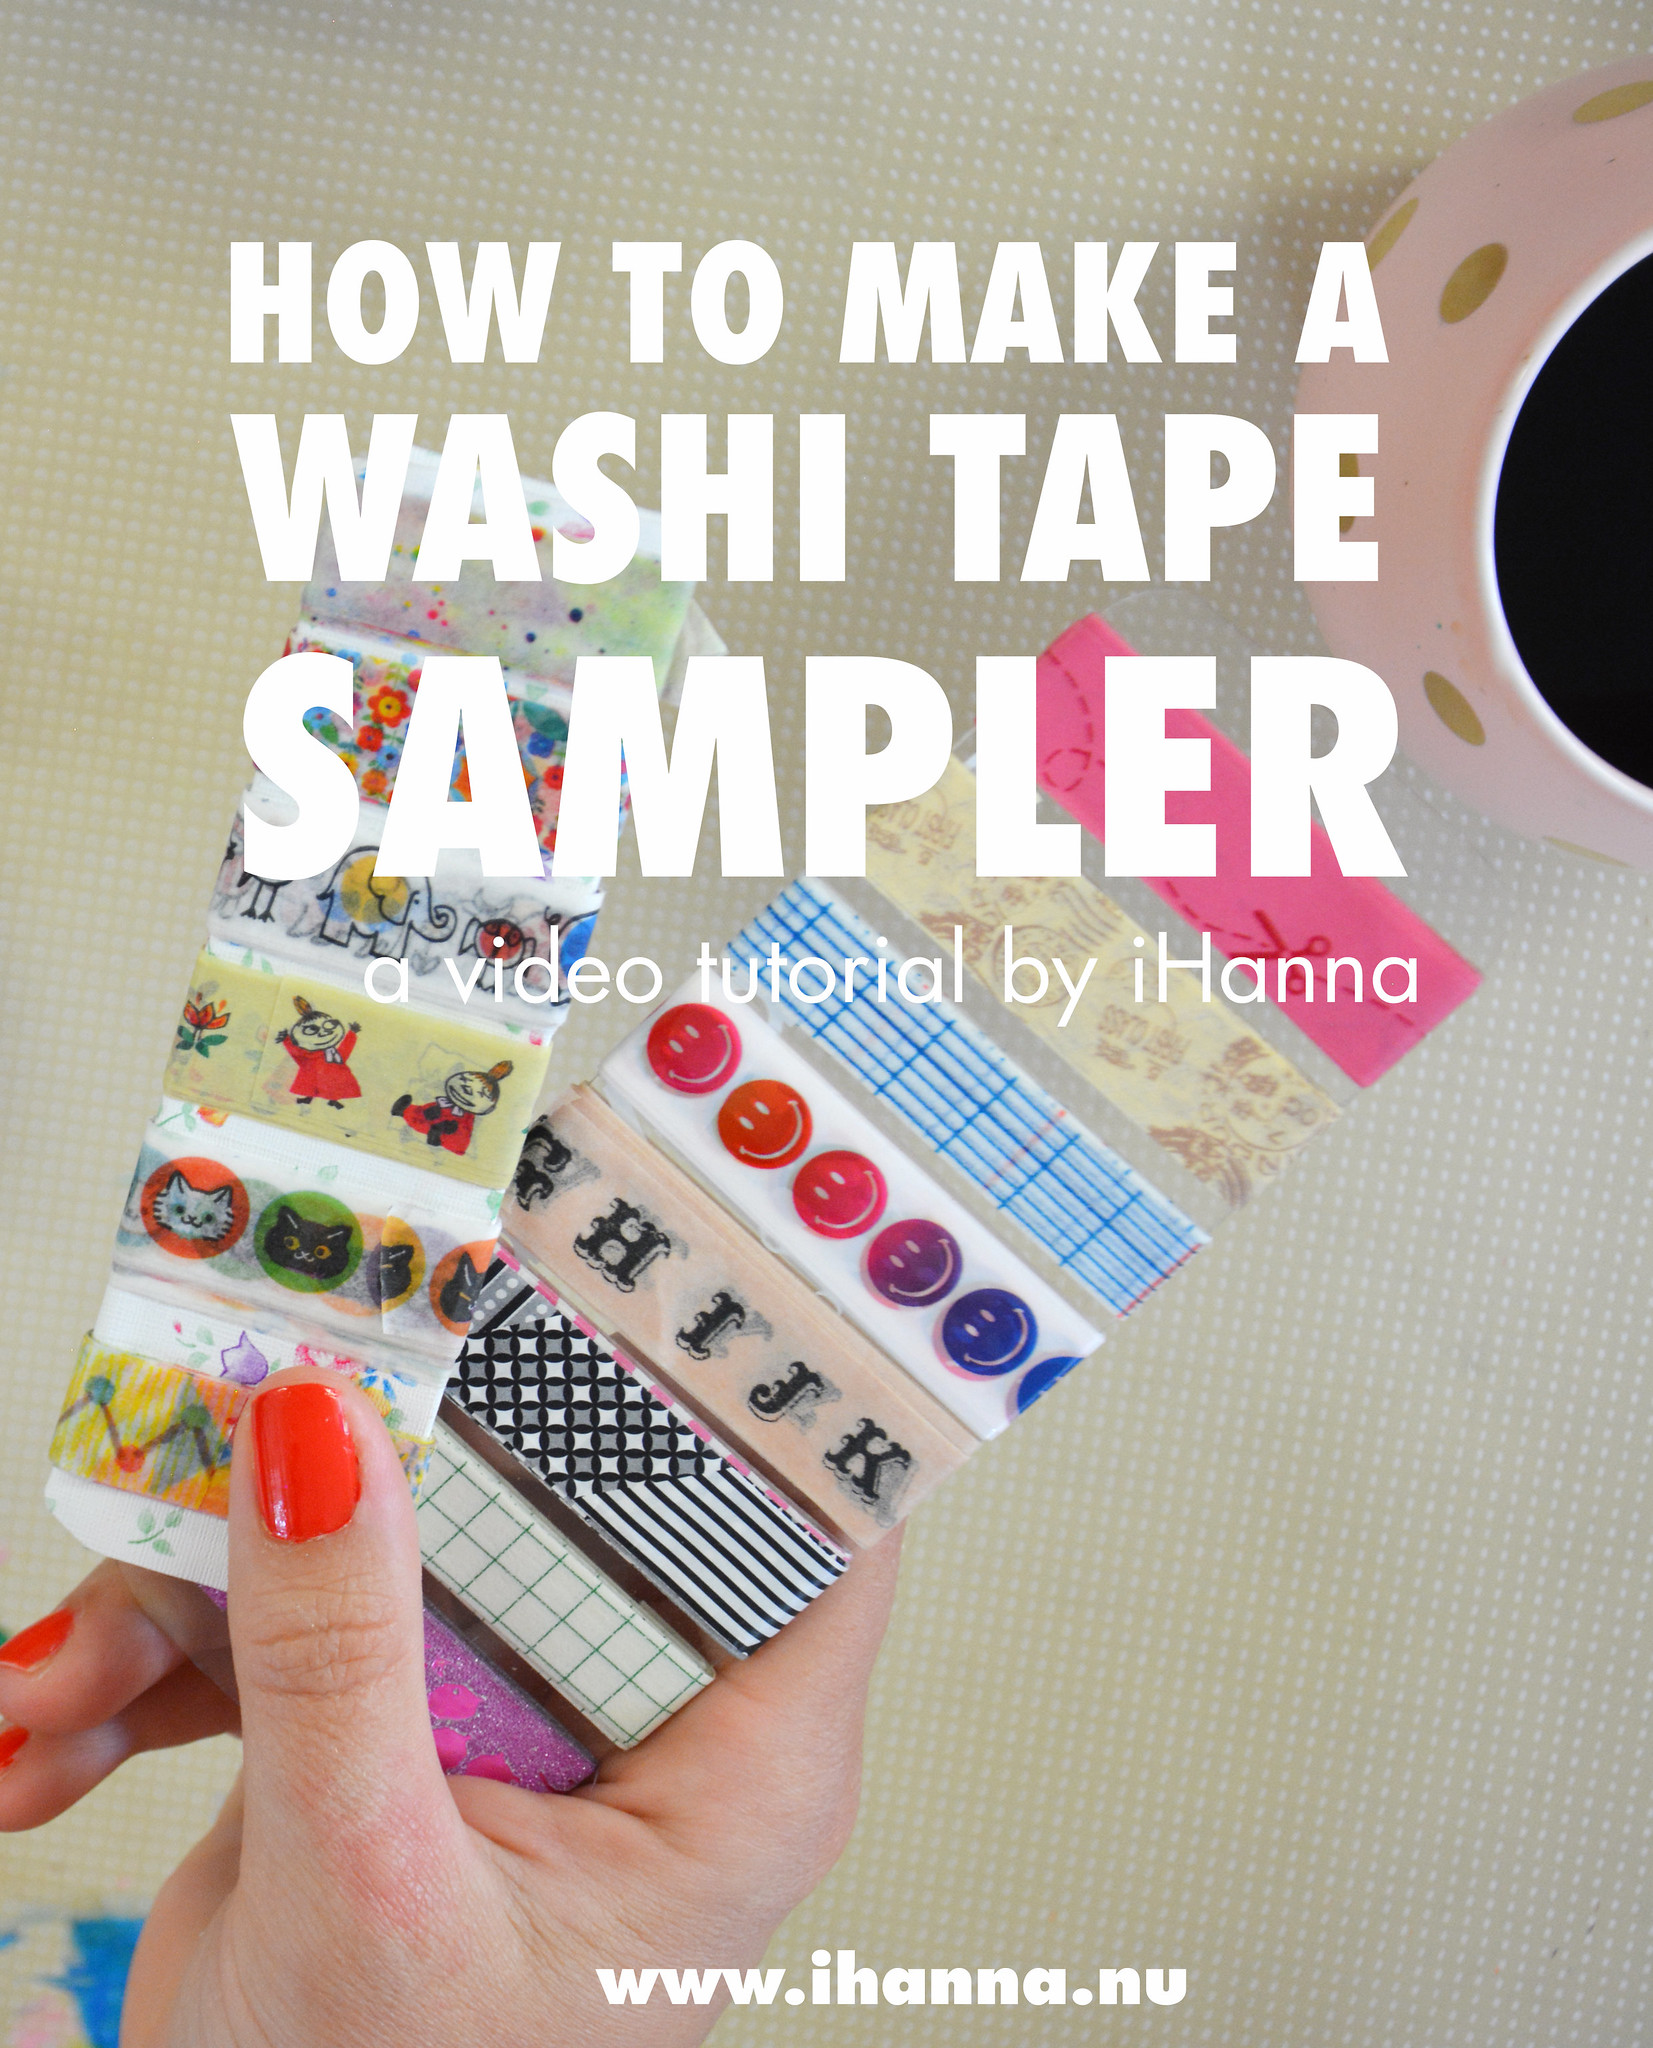 Book Review: Fun With Washi - Make and Takes